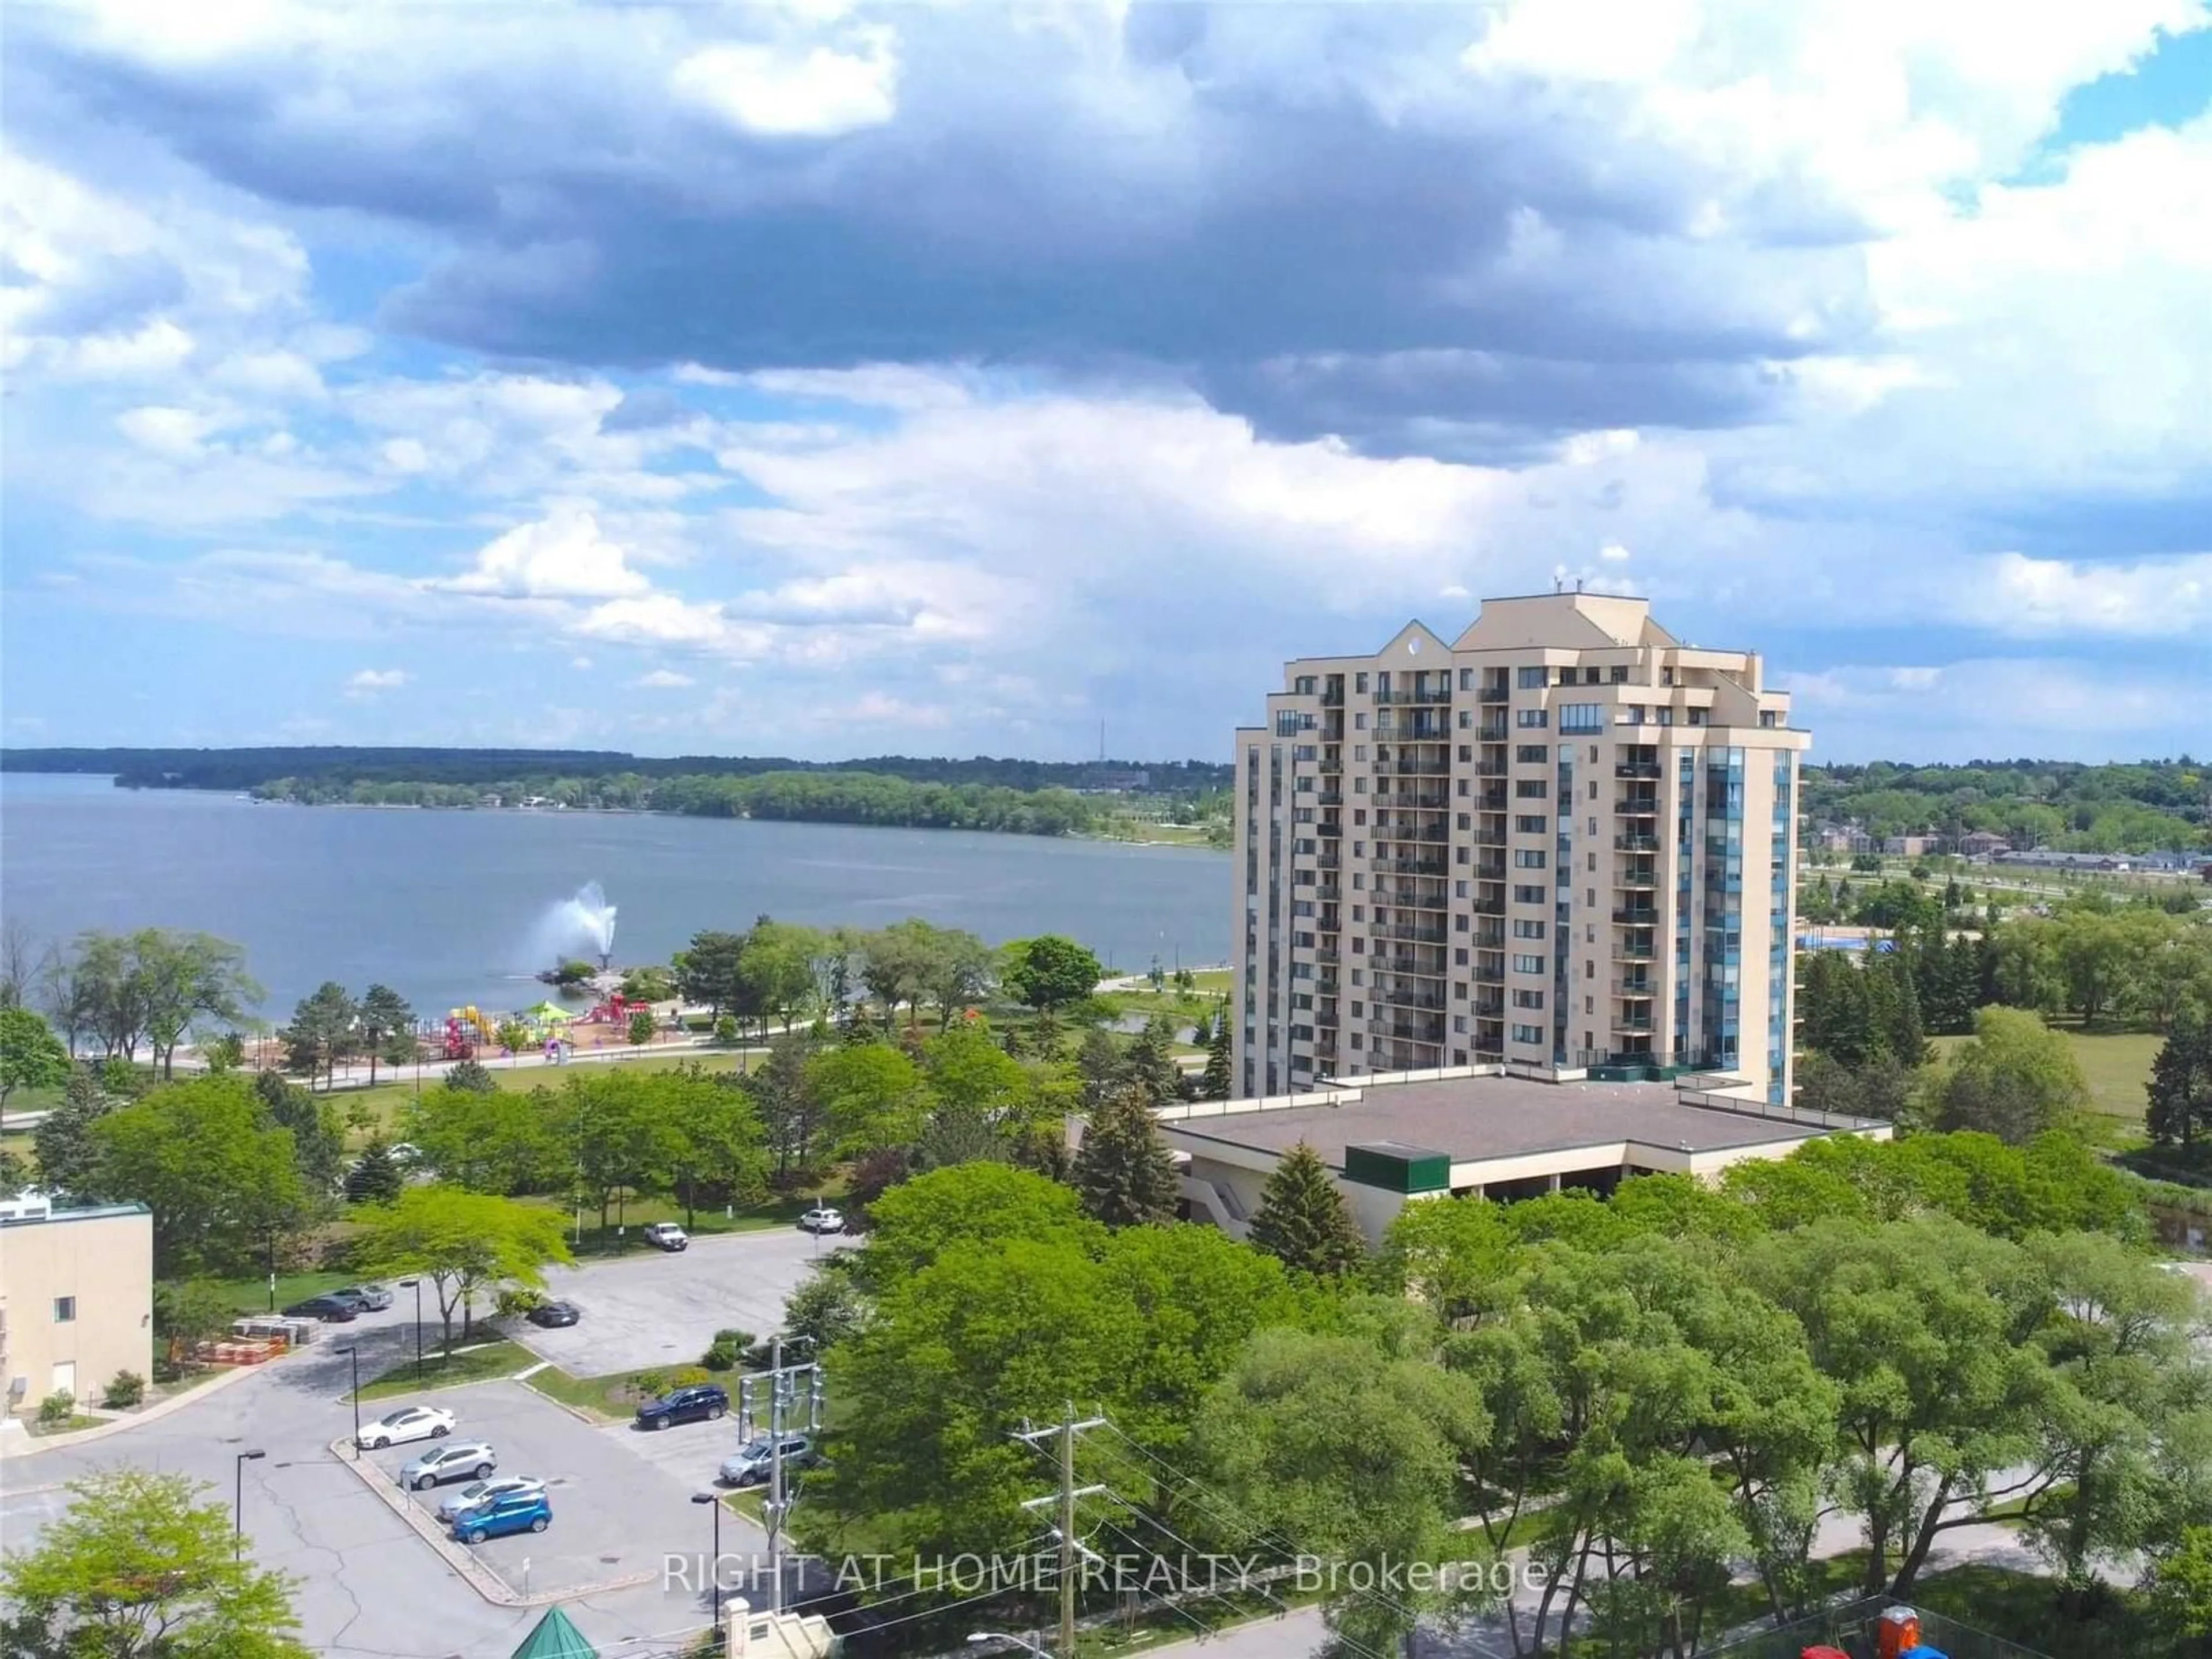 Lakeview for 75 Ellen St #101, Barrie Ontario L4N 7R6